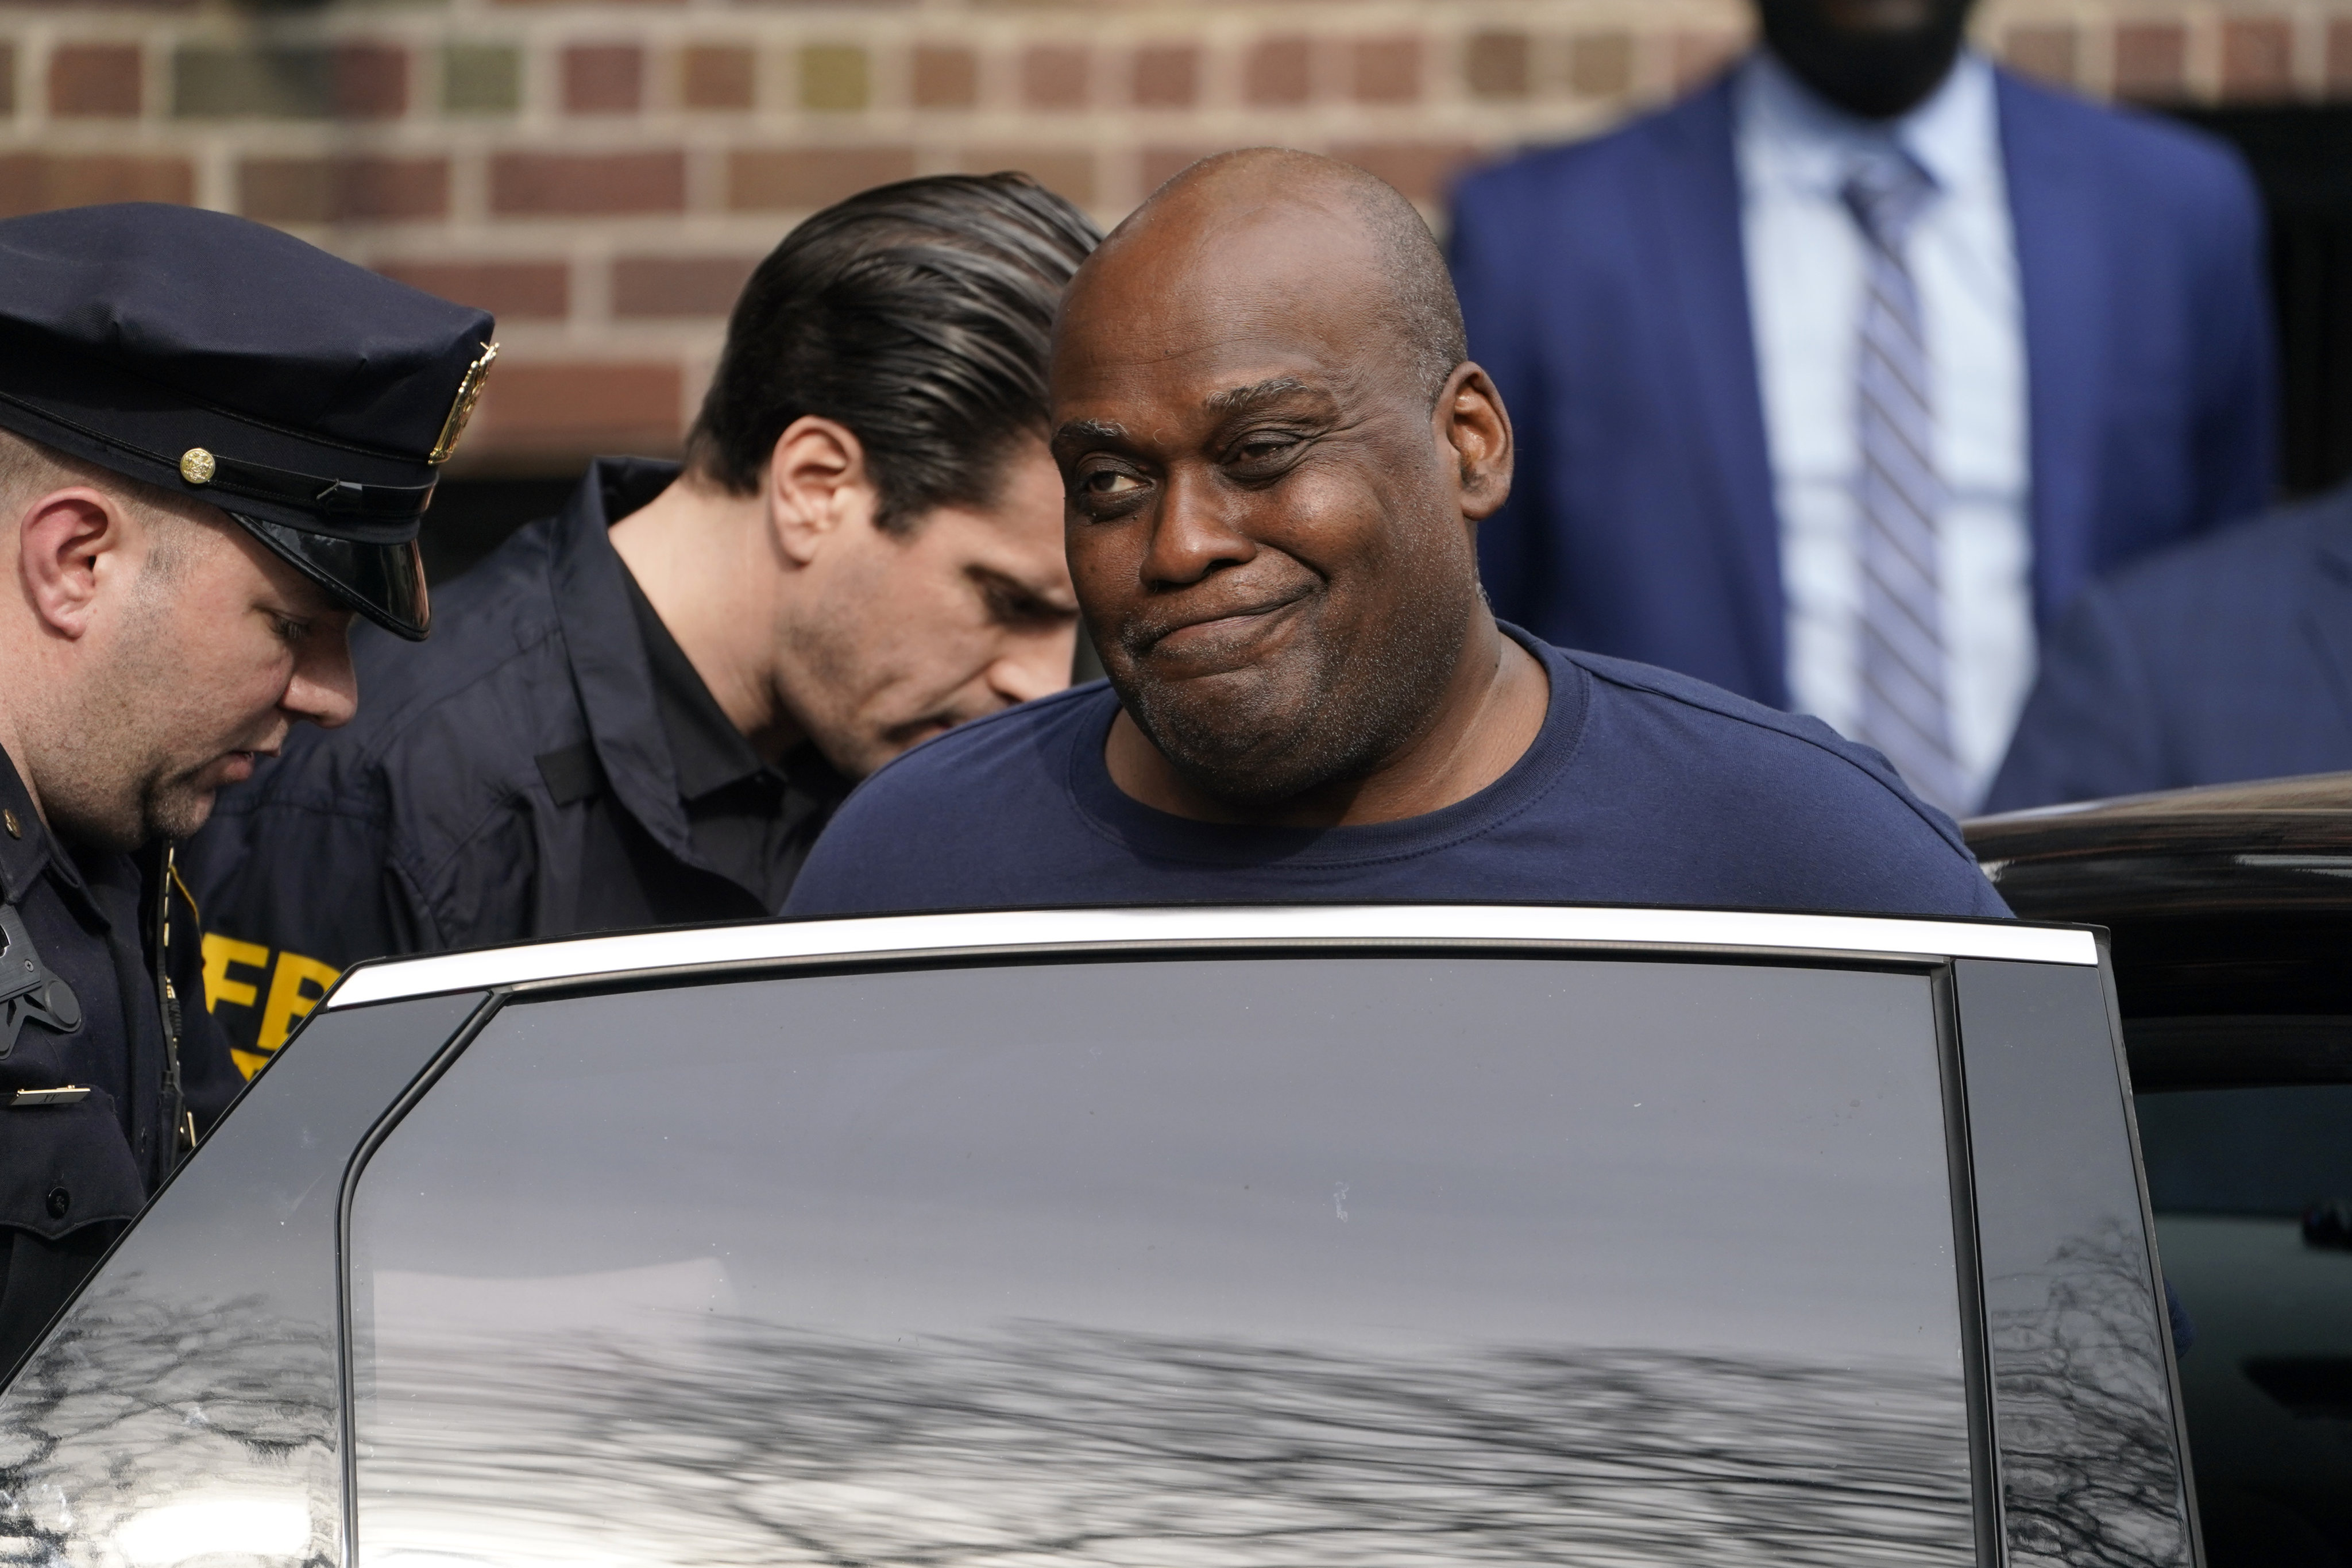 Law enforcement officials lead subway shooter Frank James away from a police station and into a vehicle in New York in April 2022. Photo: AP